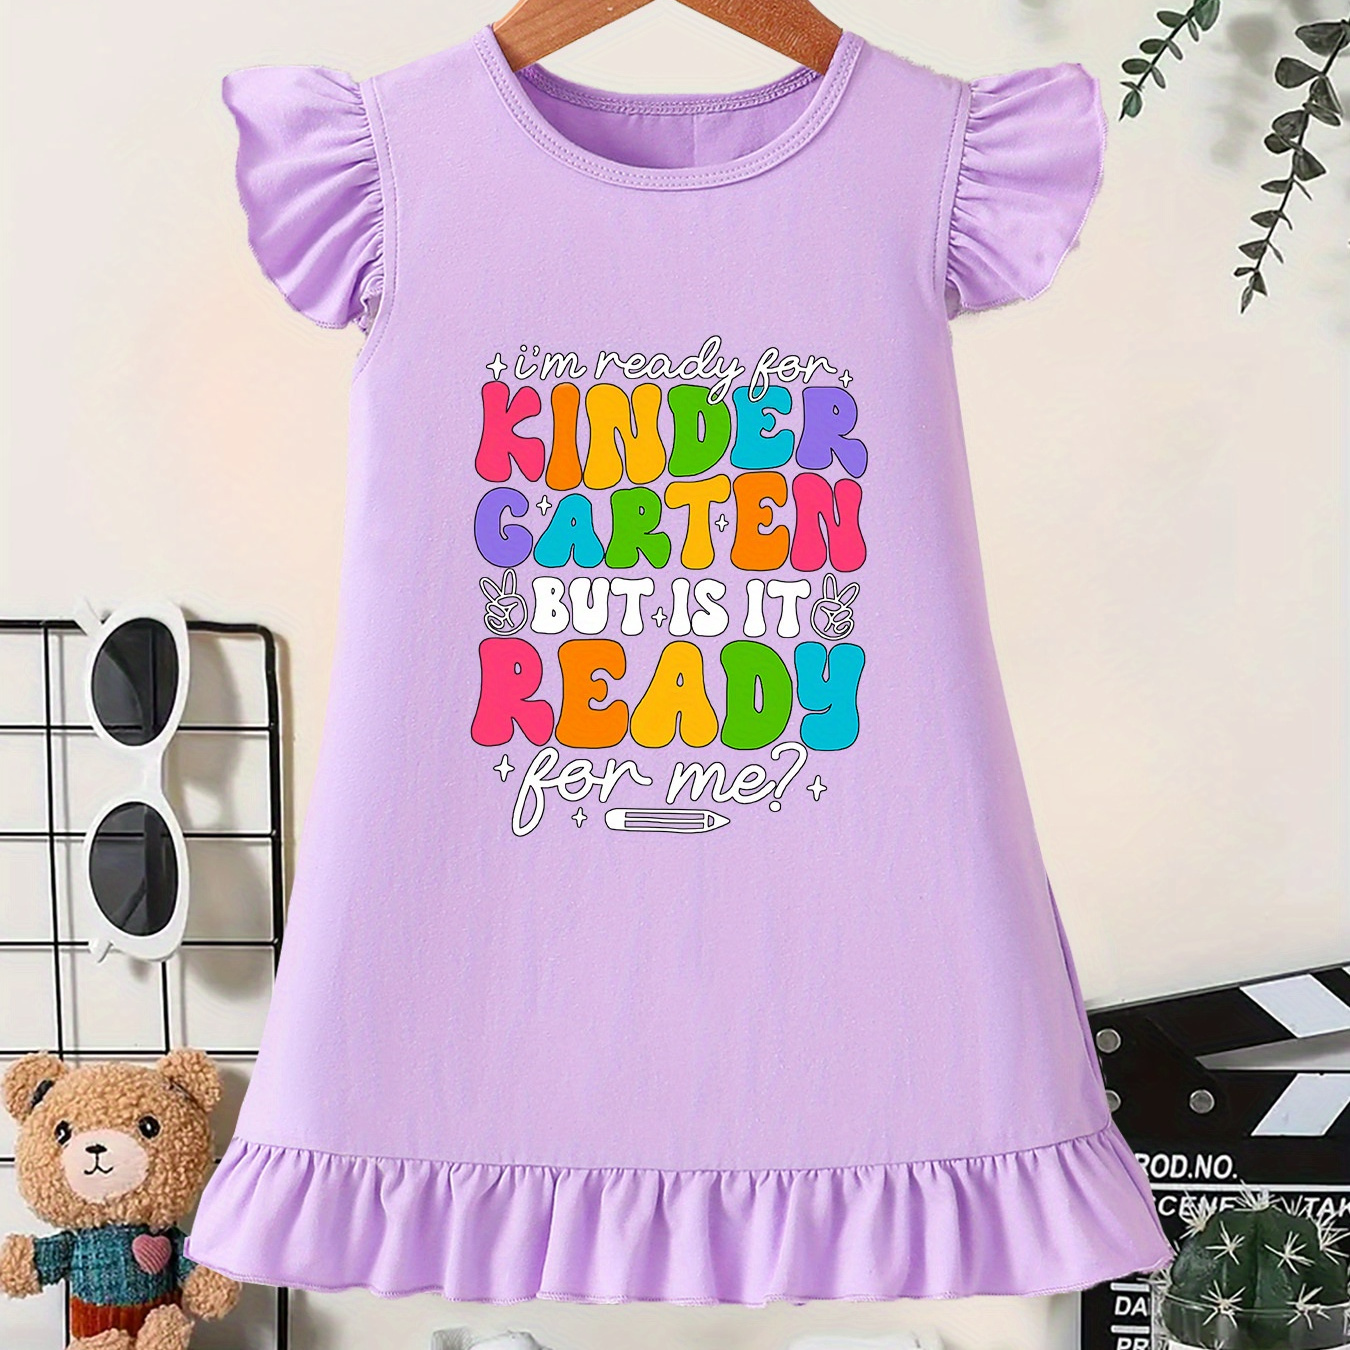 

Girls' Summer Casual Cotton Dress, Comfortable Loose-fit Princess Gown With "i'm Ready For Kindergarten" Print, Ruffle Sleeve